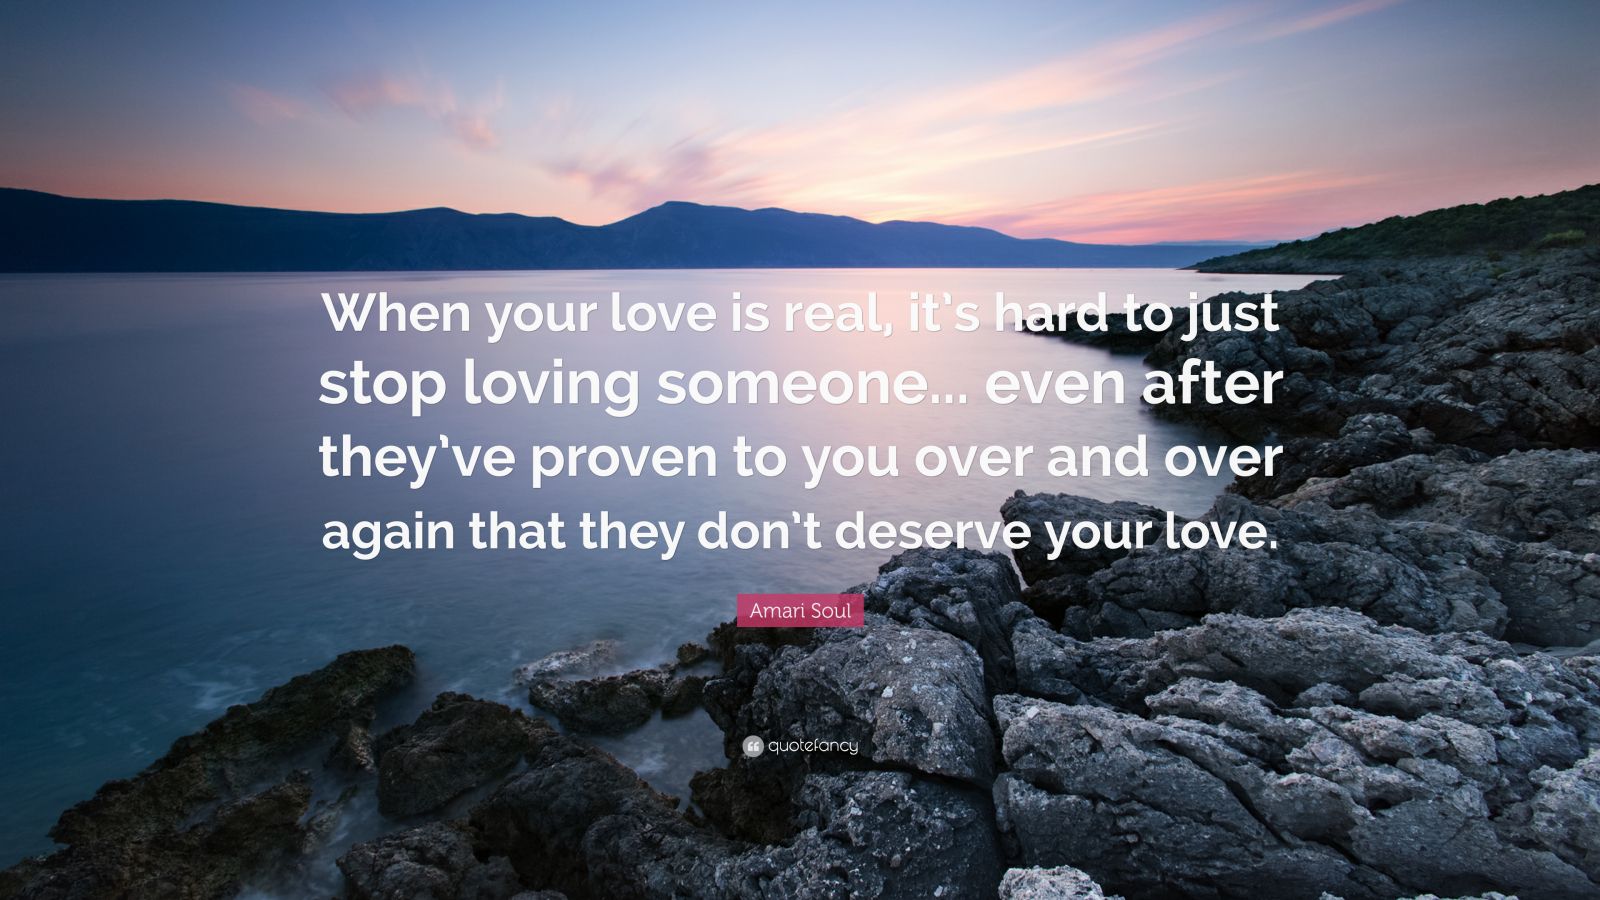 Amari Soul Quote: “When your love is real, it's hard to just stop